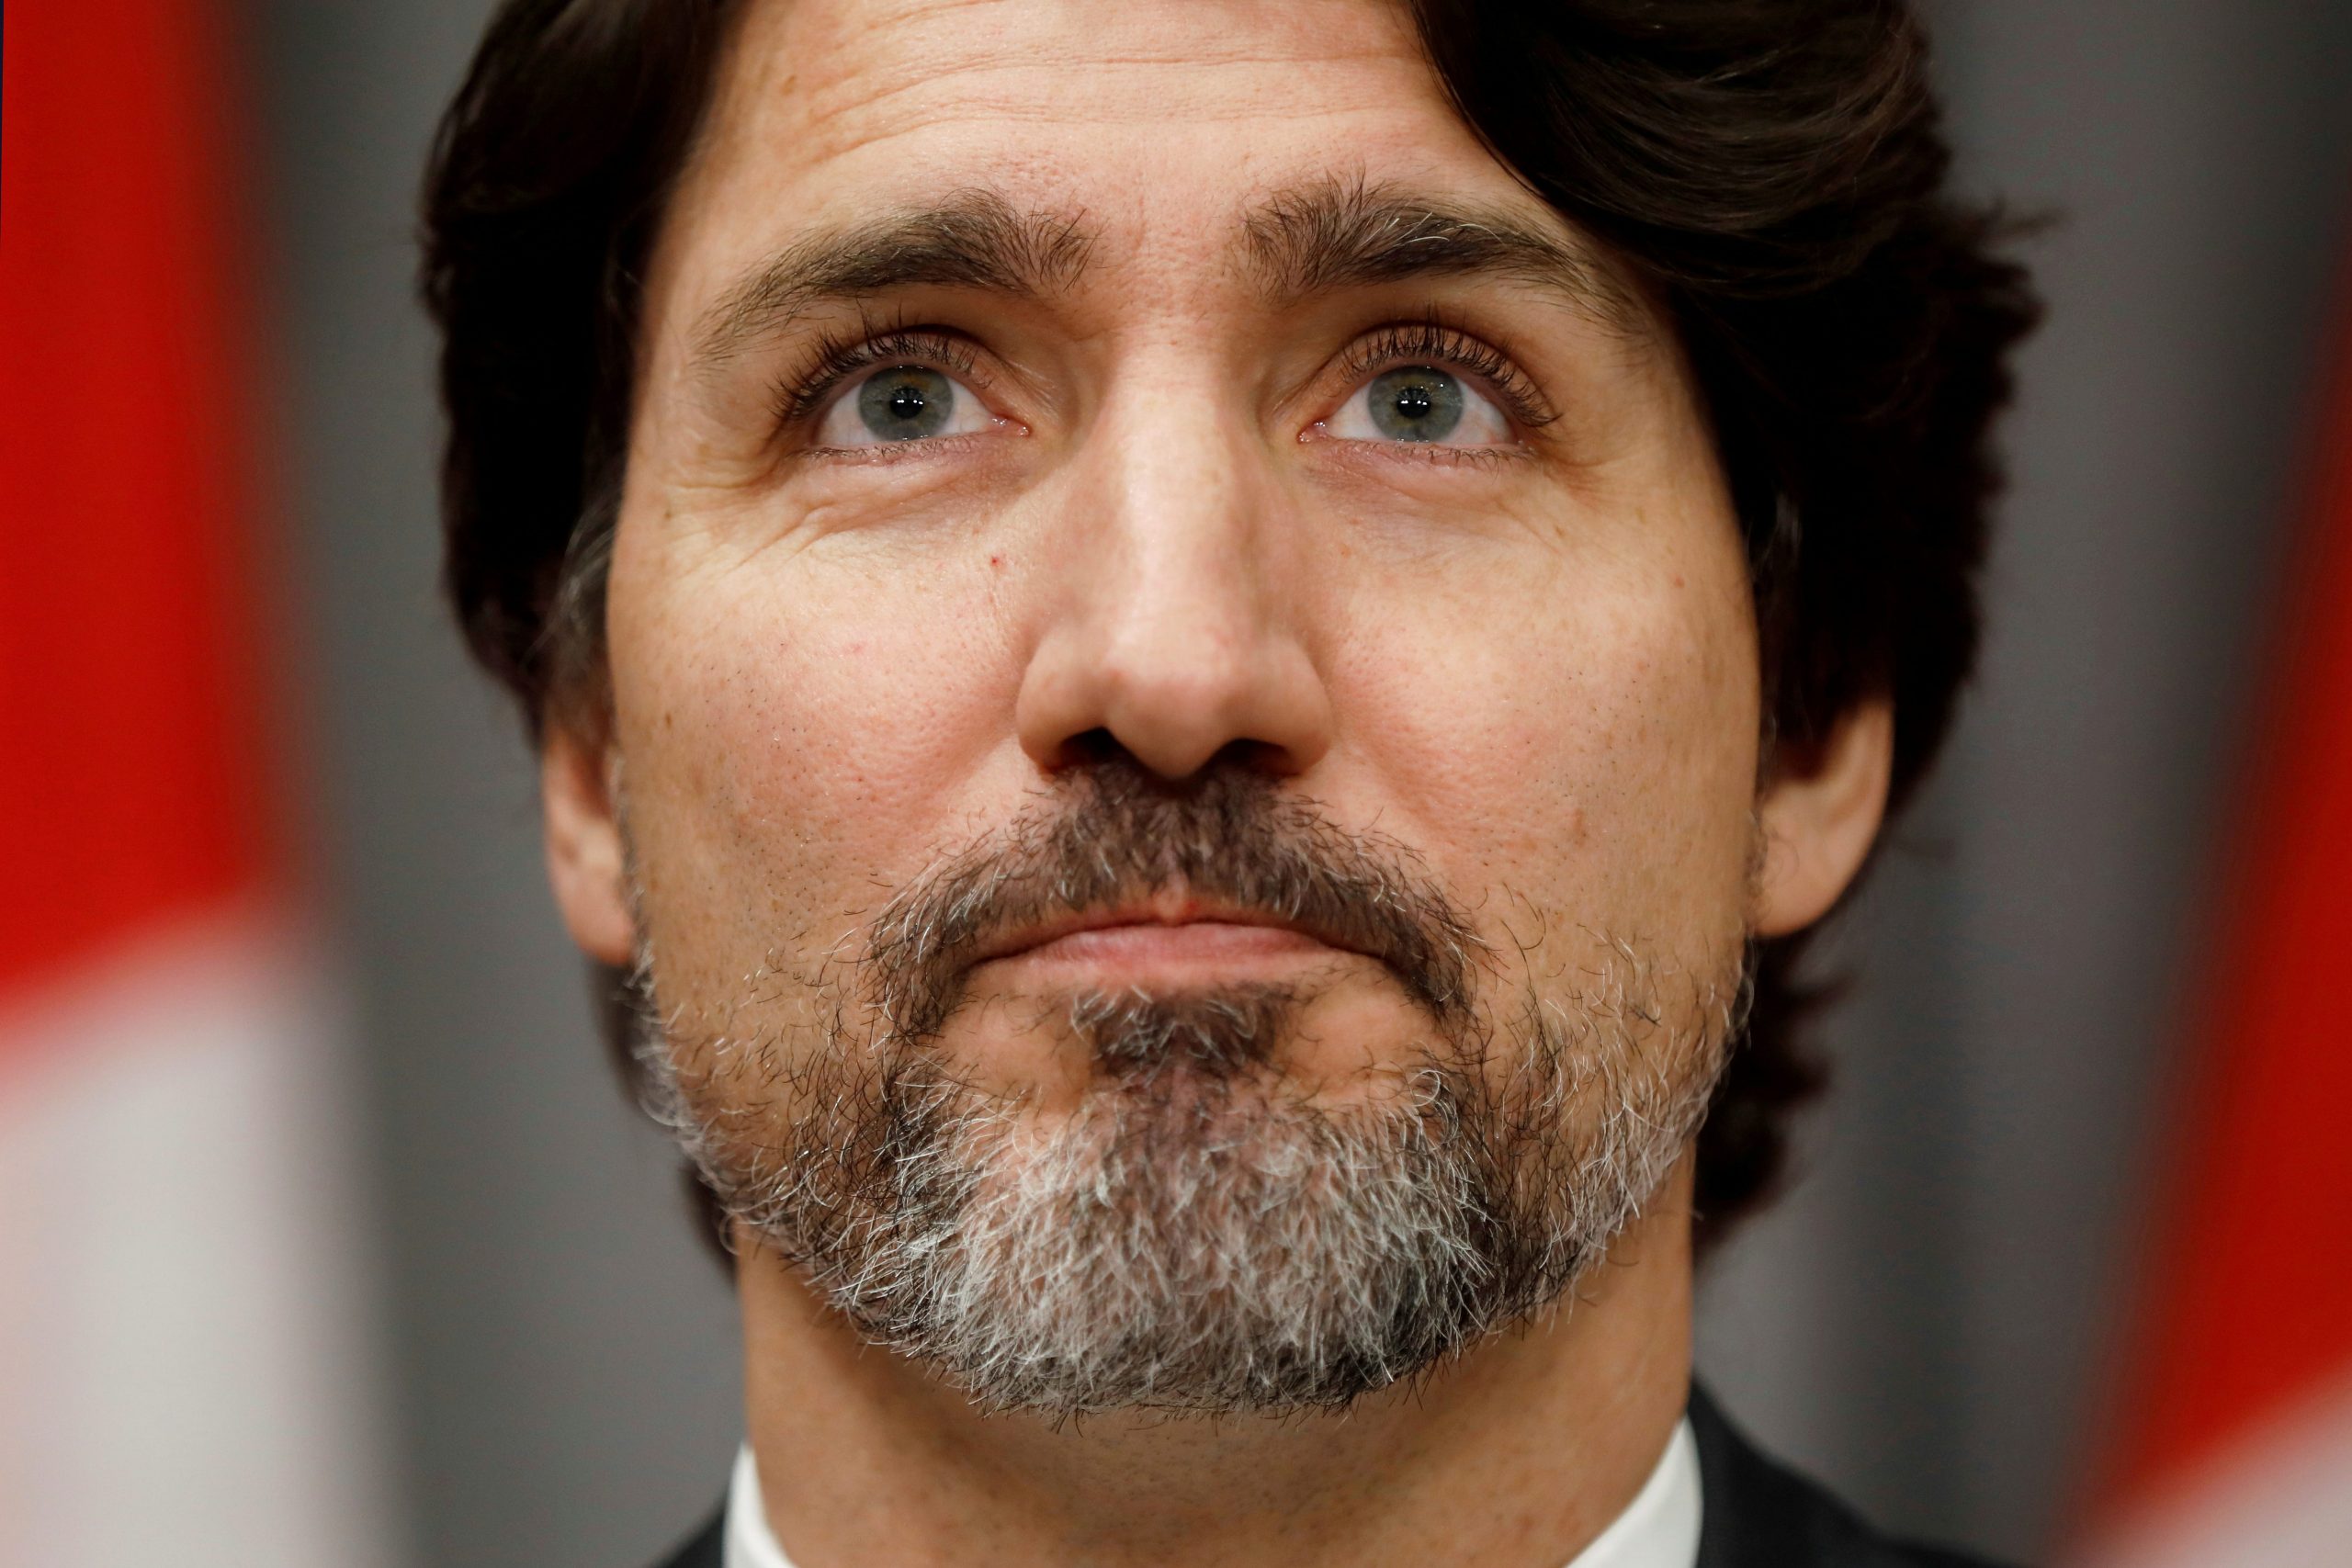 Justin Trudeau duped by Russian pranksters posing as Greta 